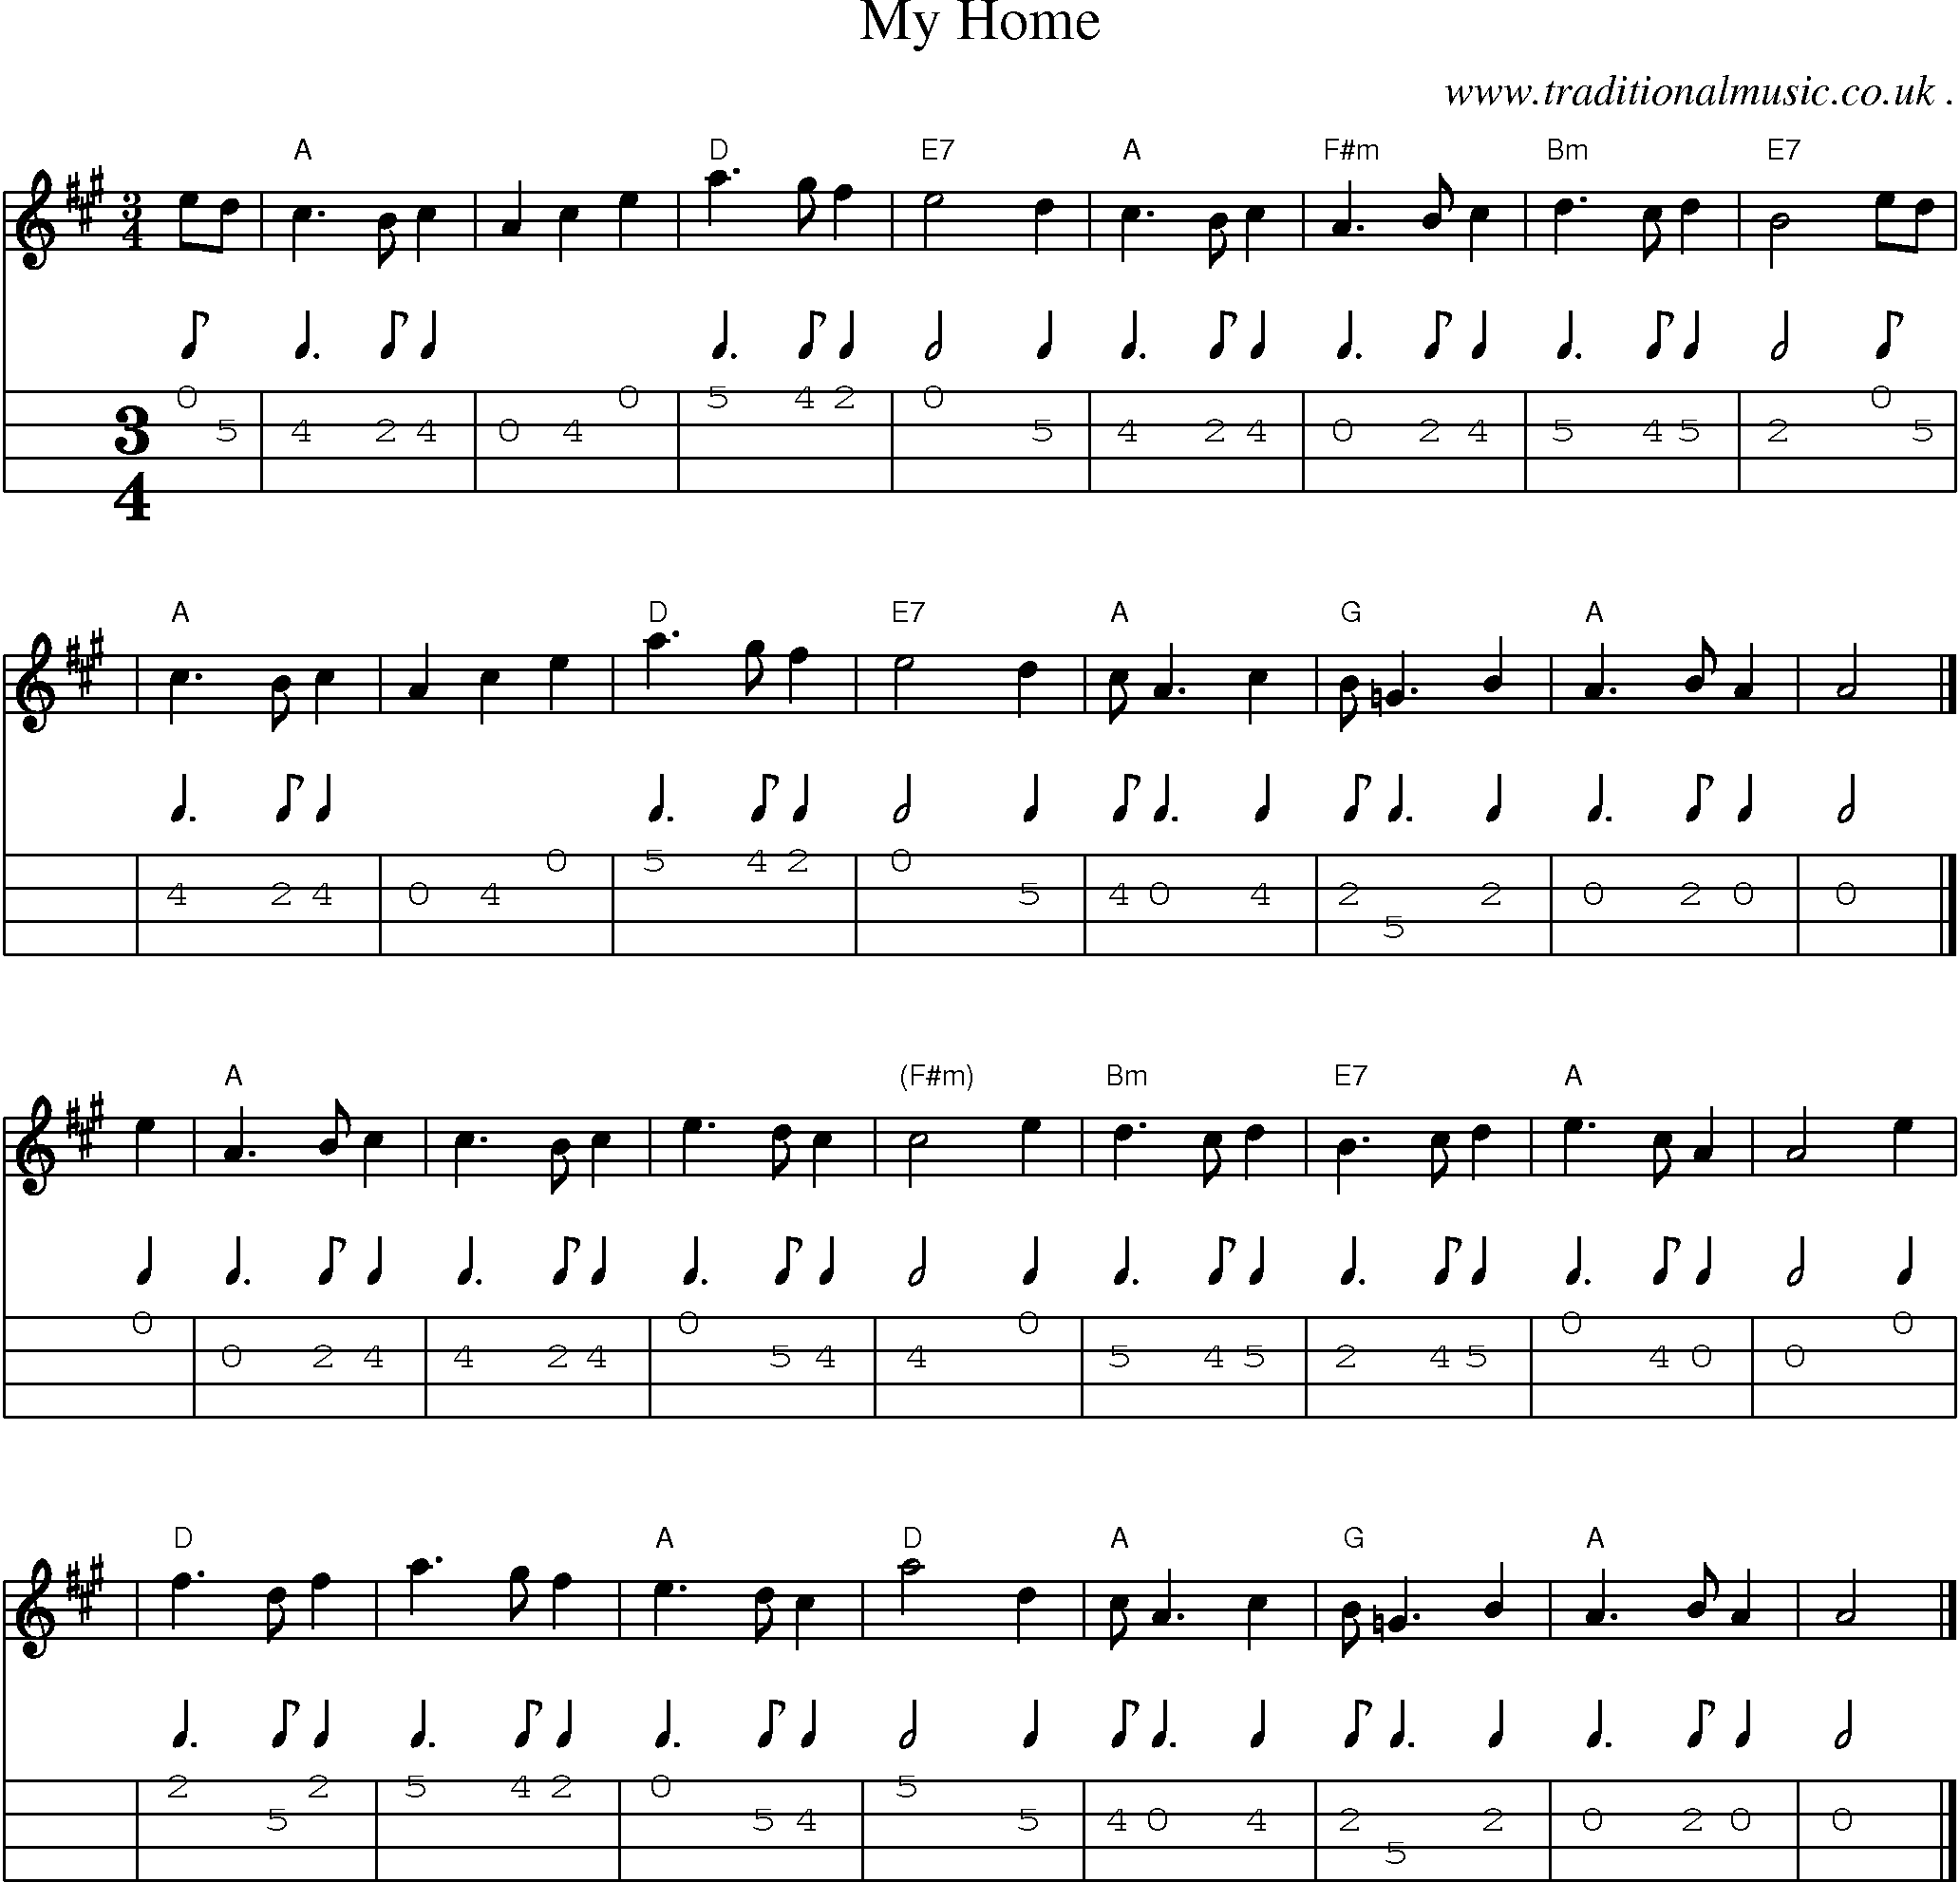 Sheet-music  score, Chords and Mandolin Tabs for My Home